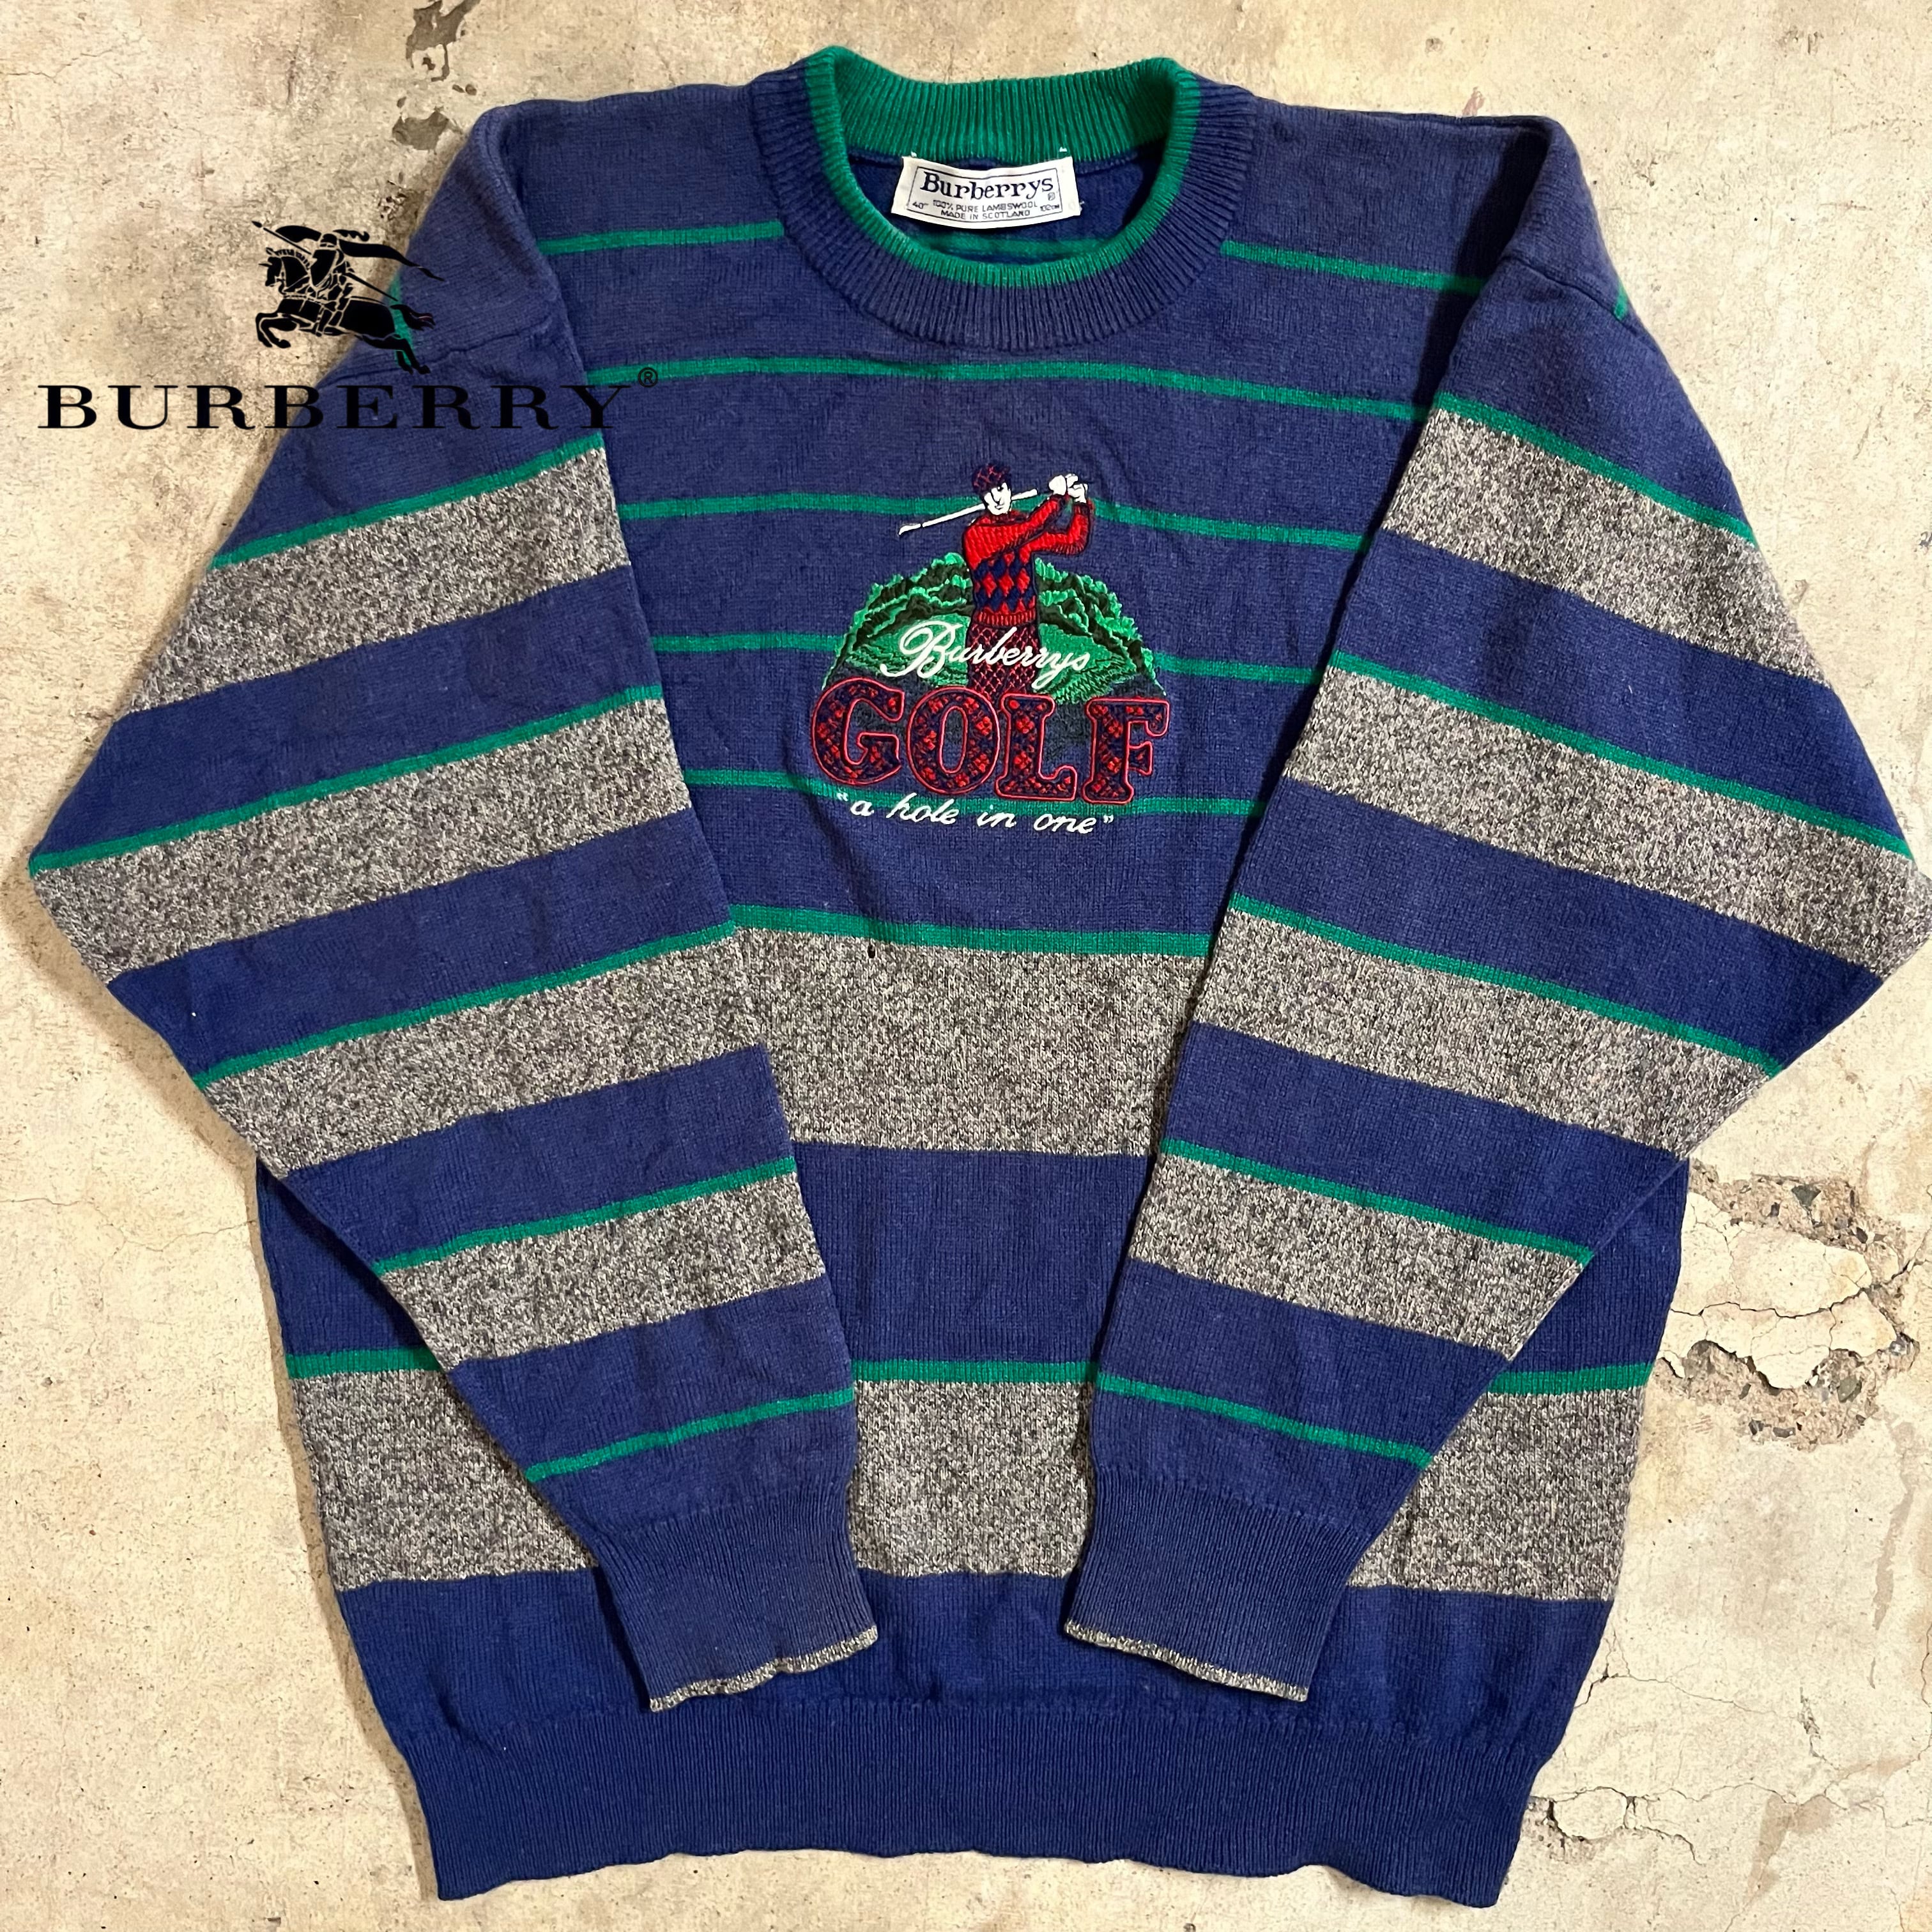 【BURBERRY】90's made in Scotland lambwool golf embroidery